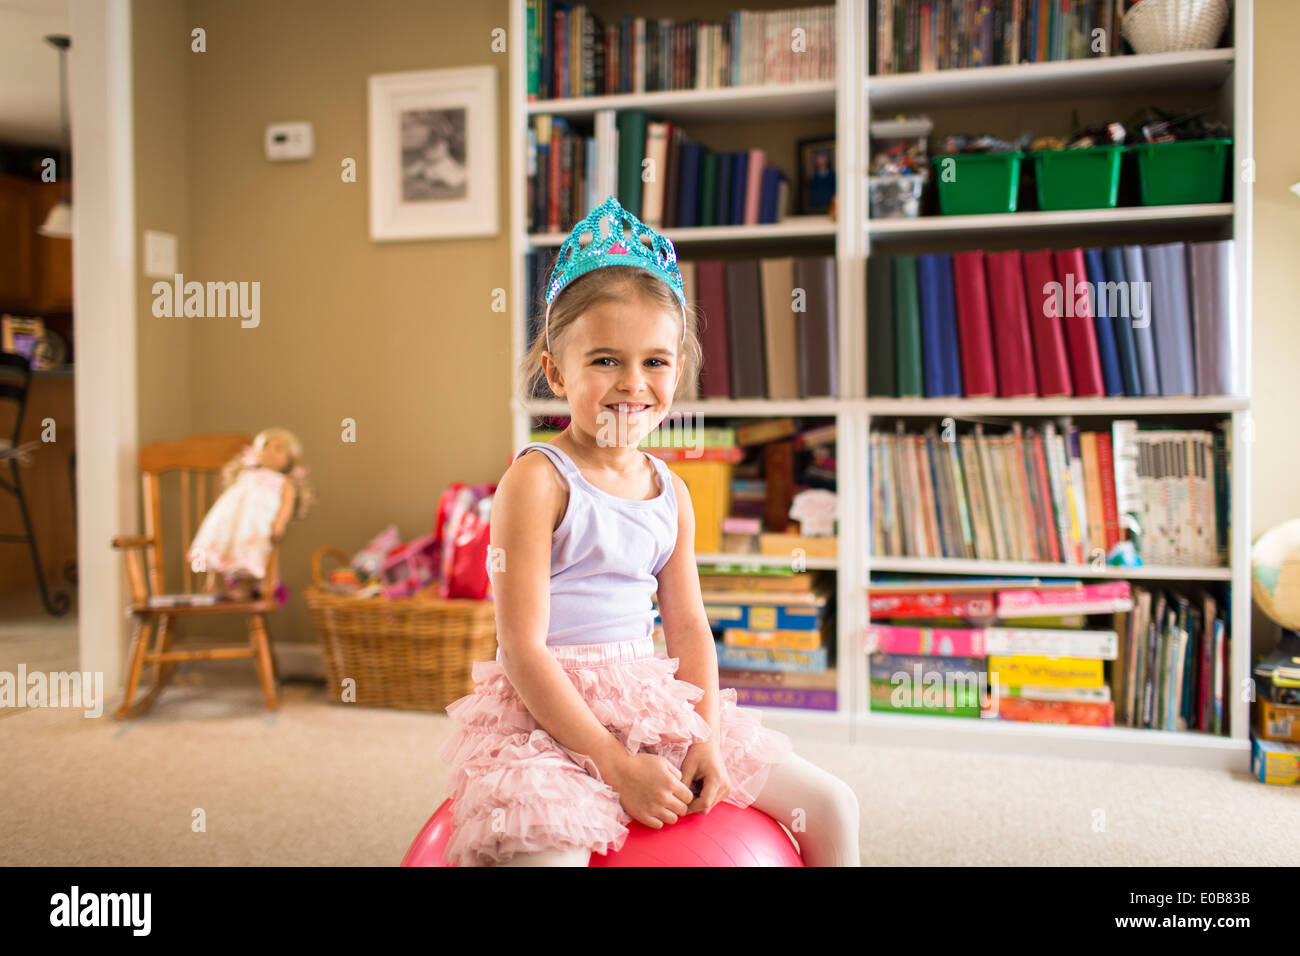 Portrait of cute young girl sitting on exercise ball Banque D'Images